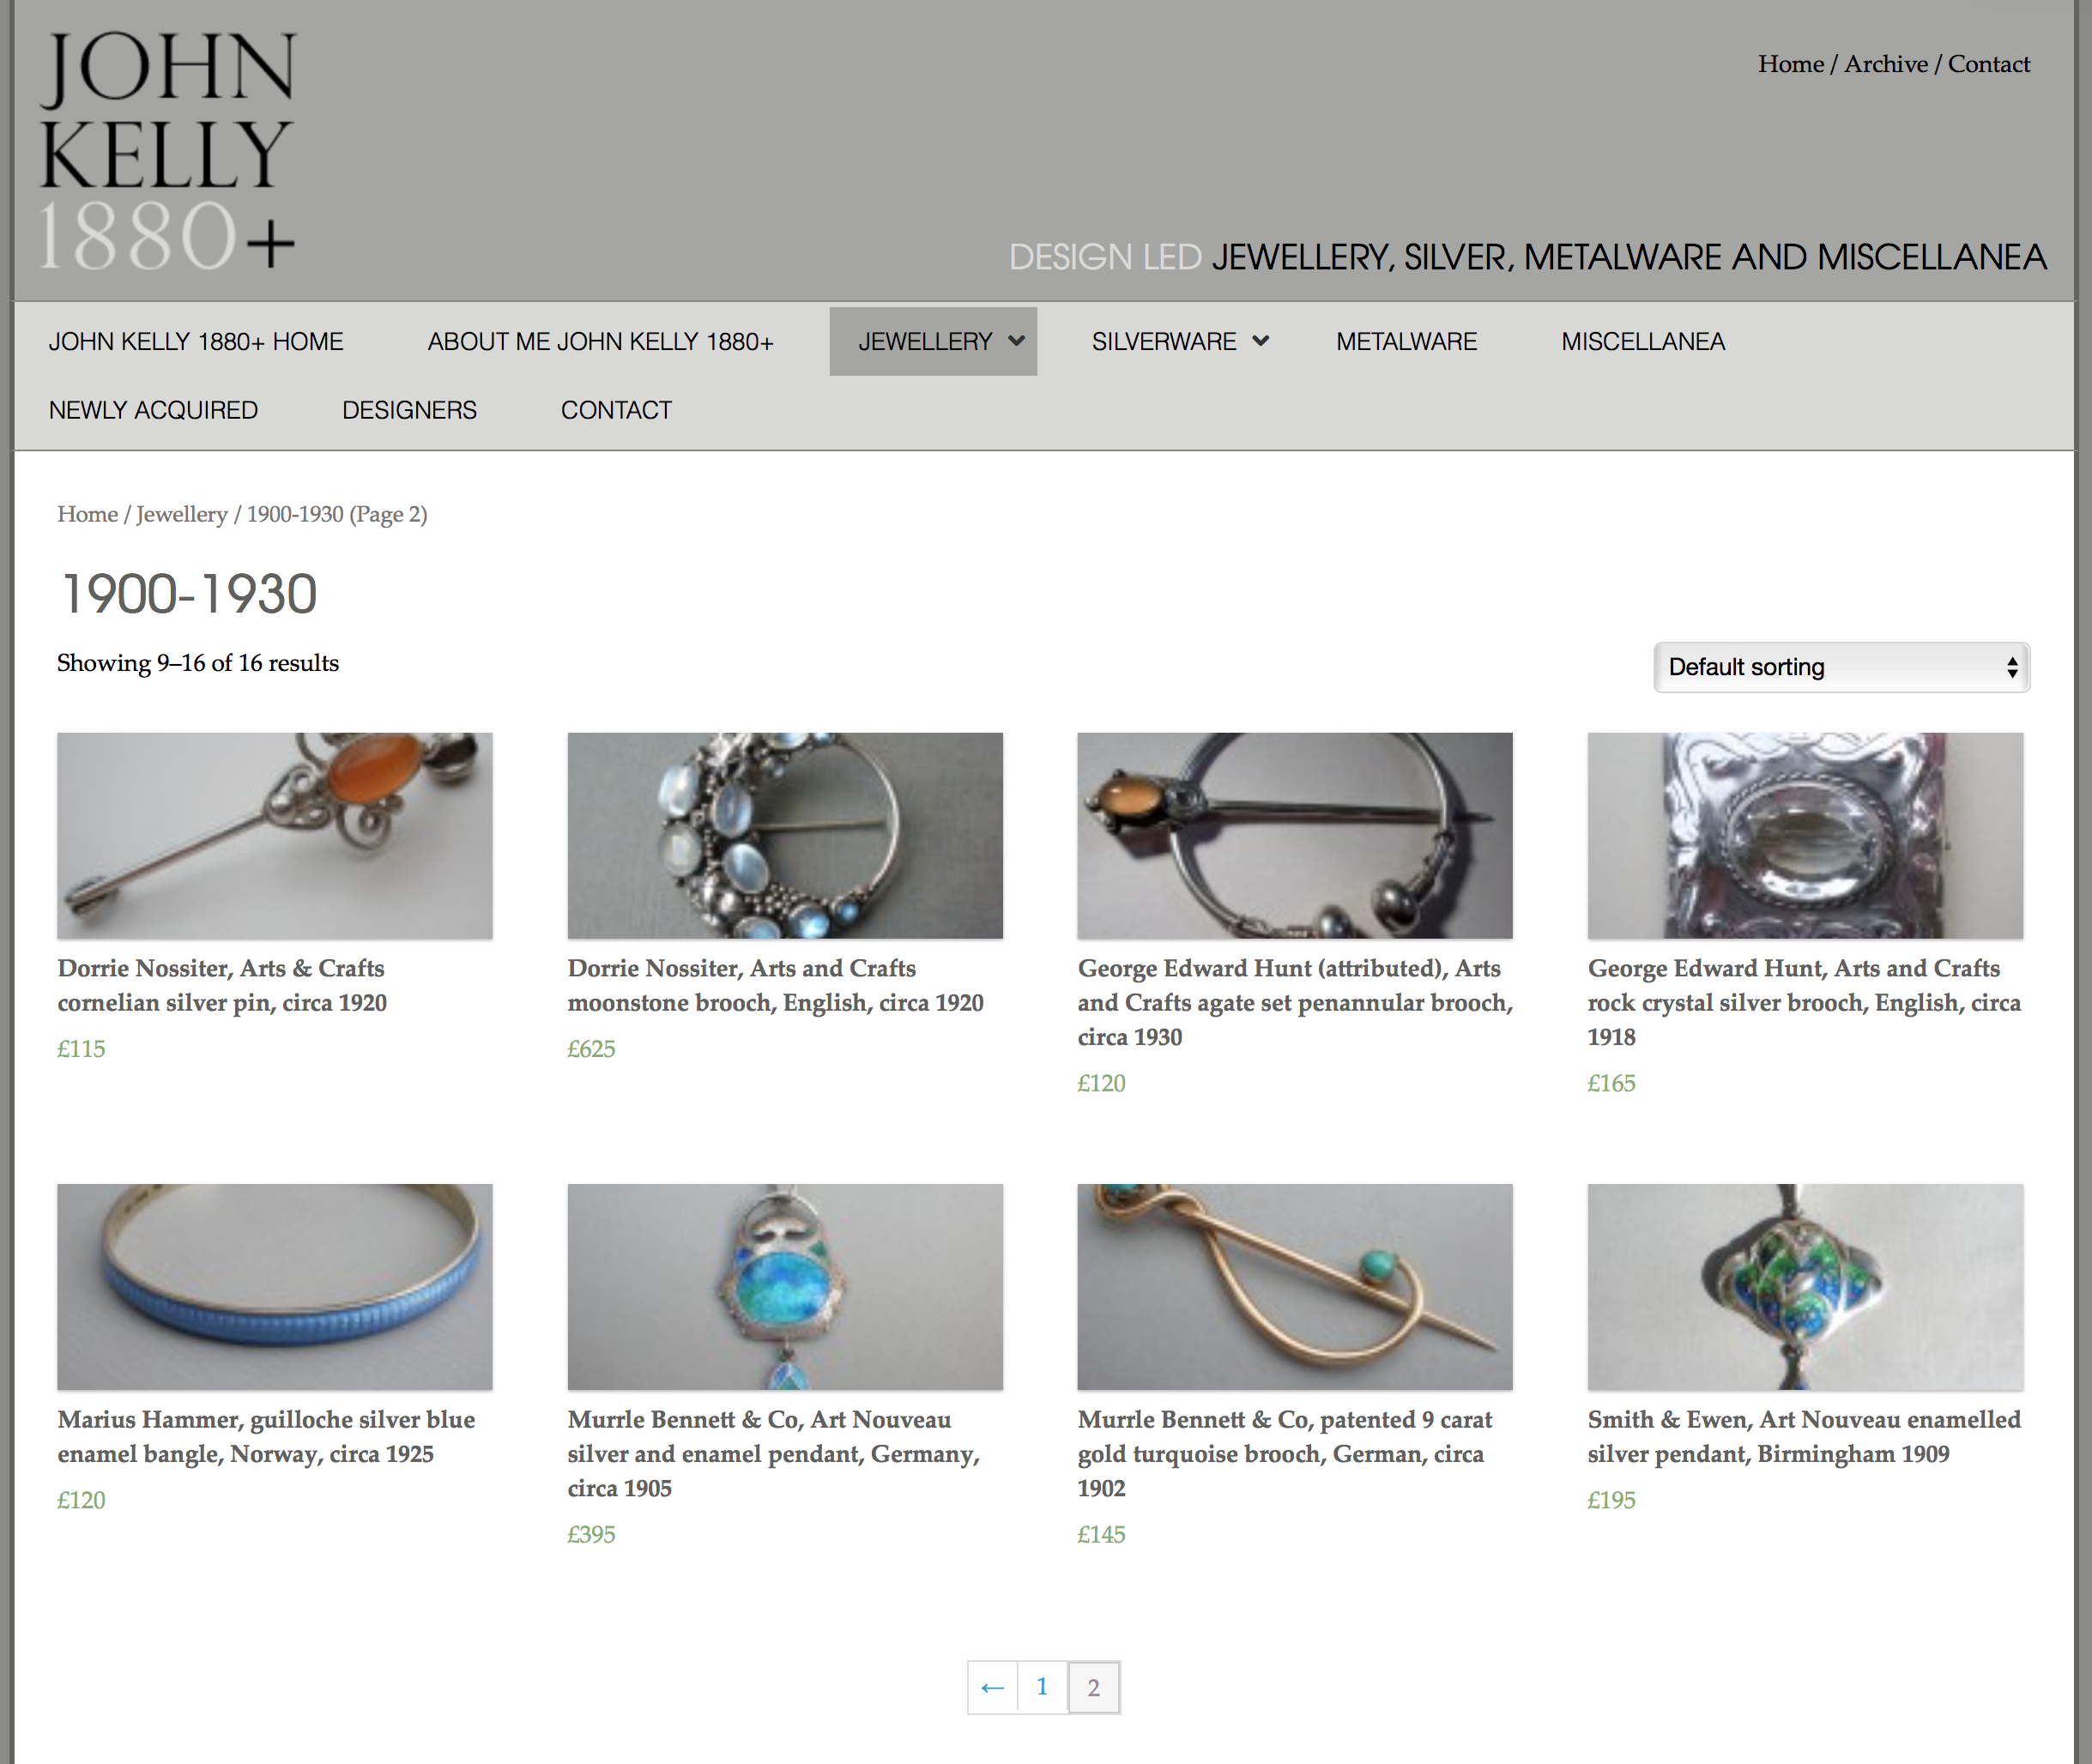 John Kelly's website page showing pieces by Dorrie